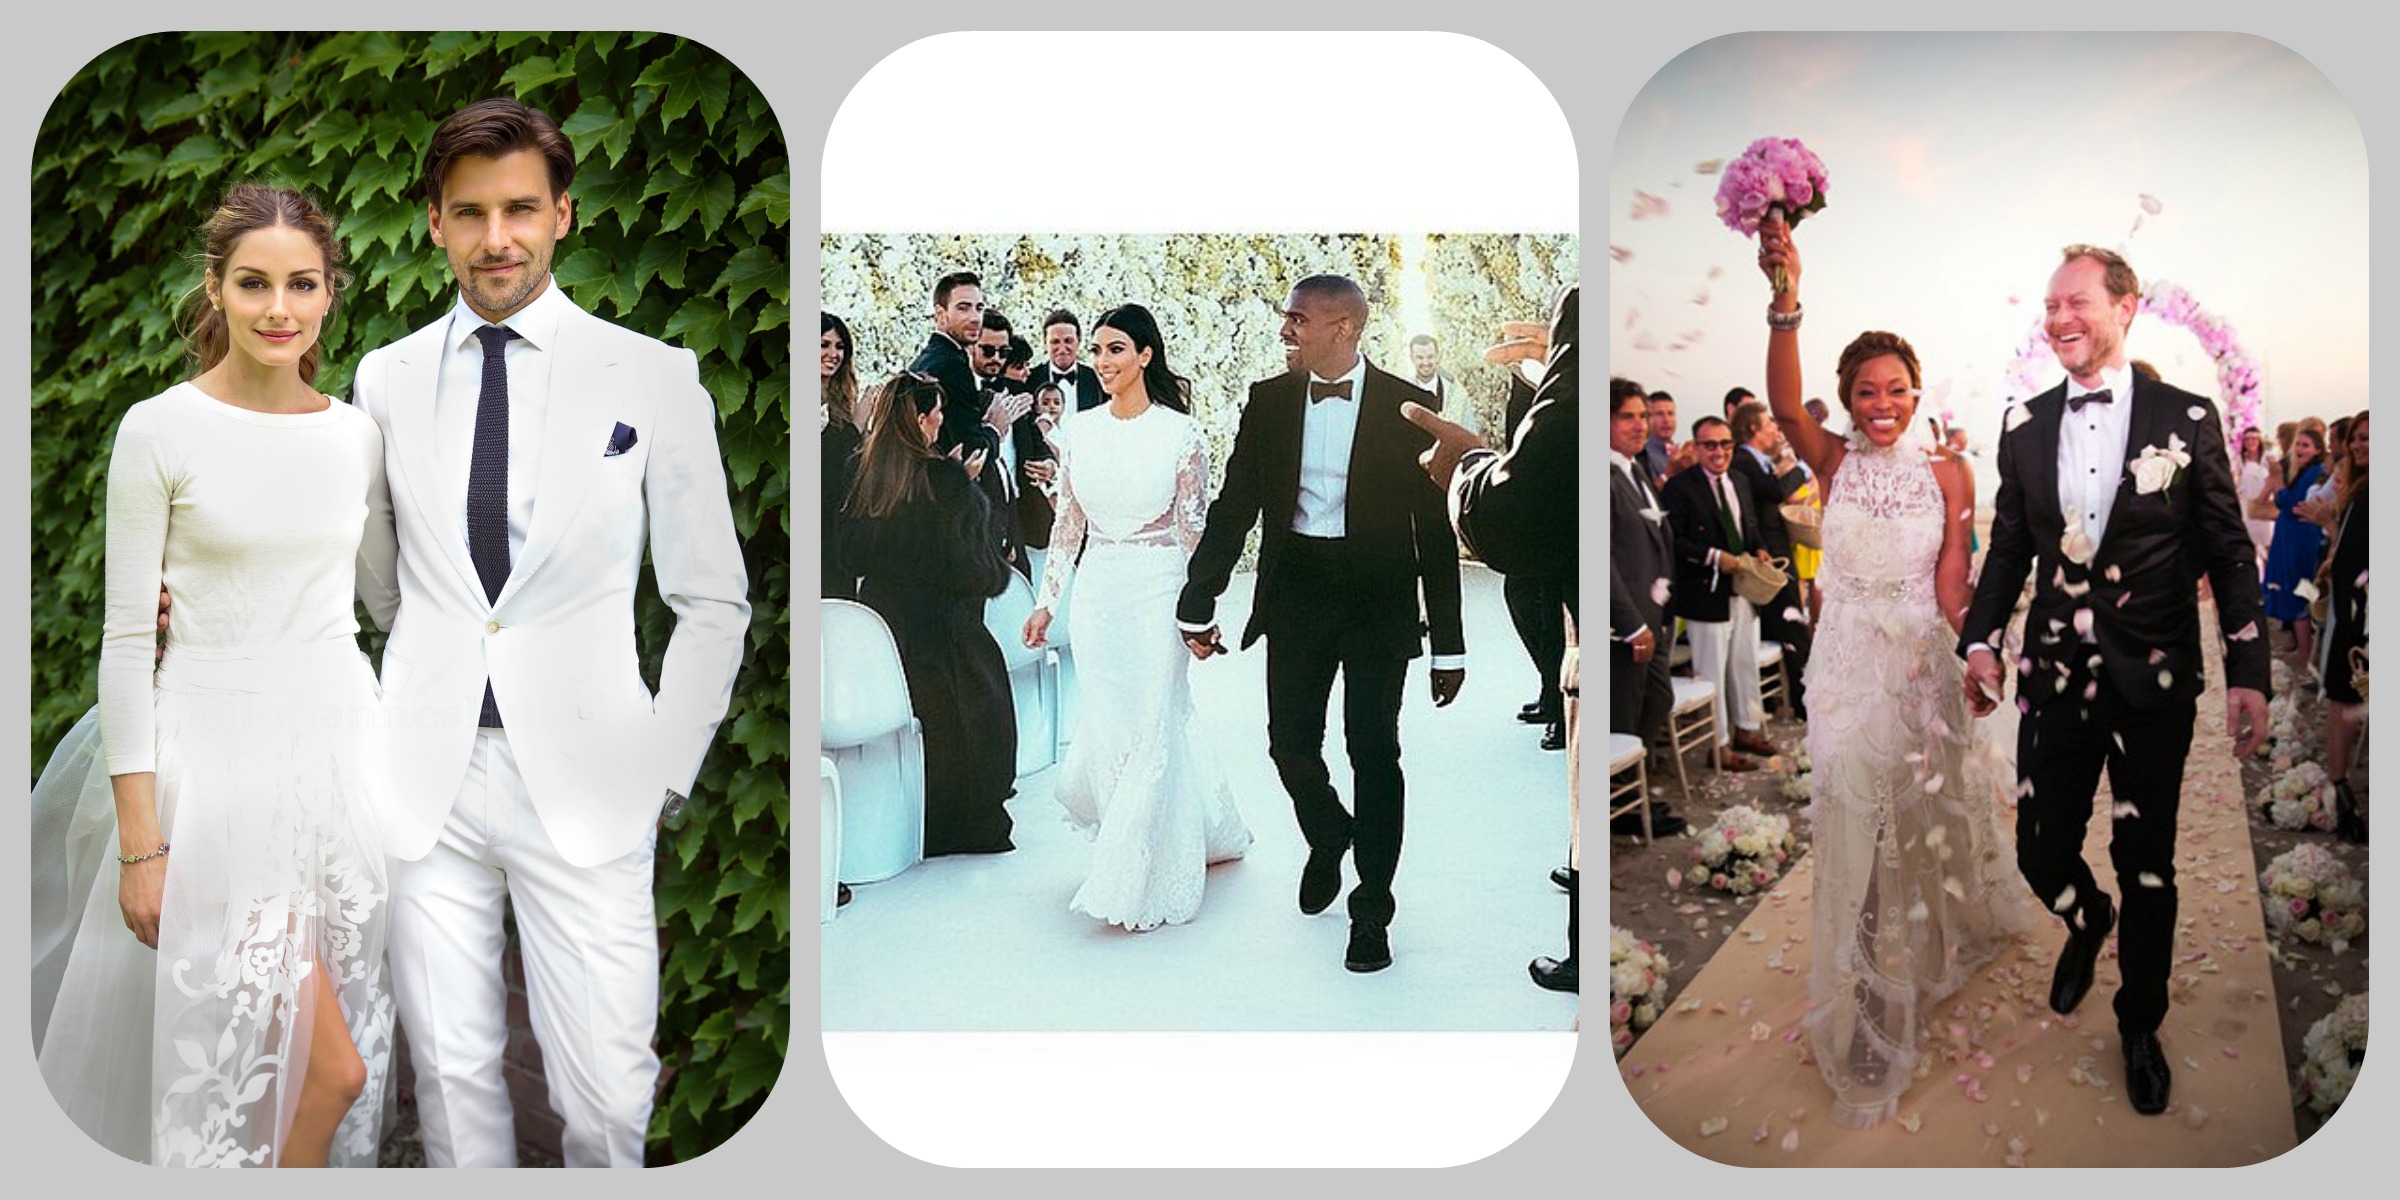 How These Celebrity Weddings Have Influenced This Year's Bridal Trends